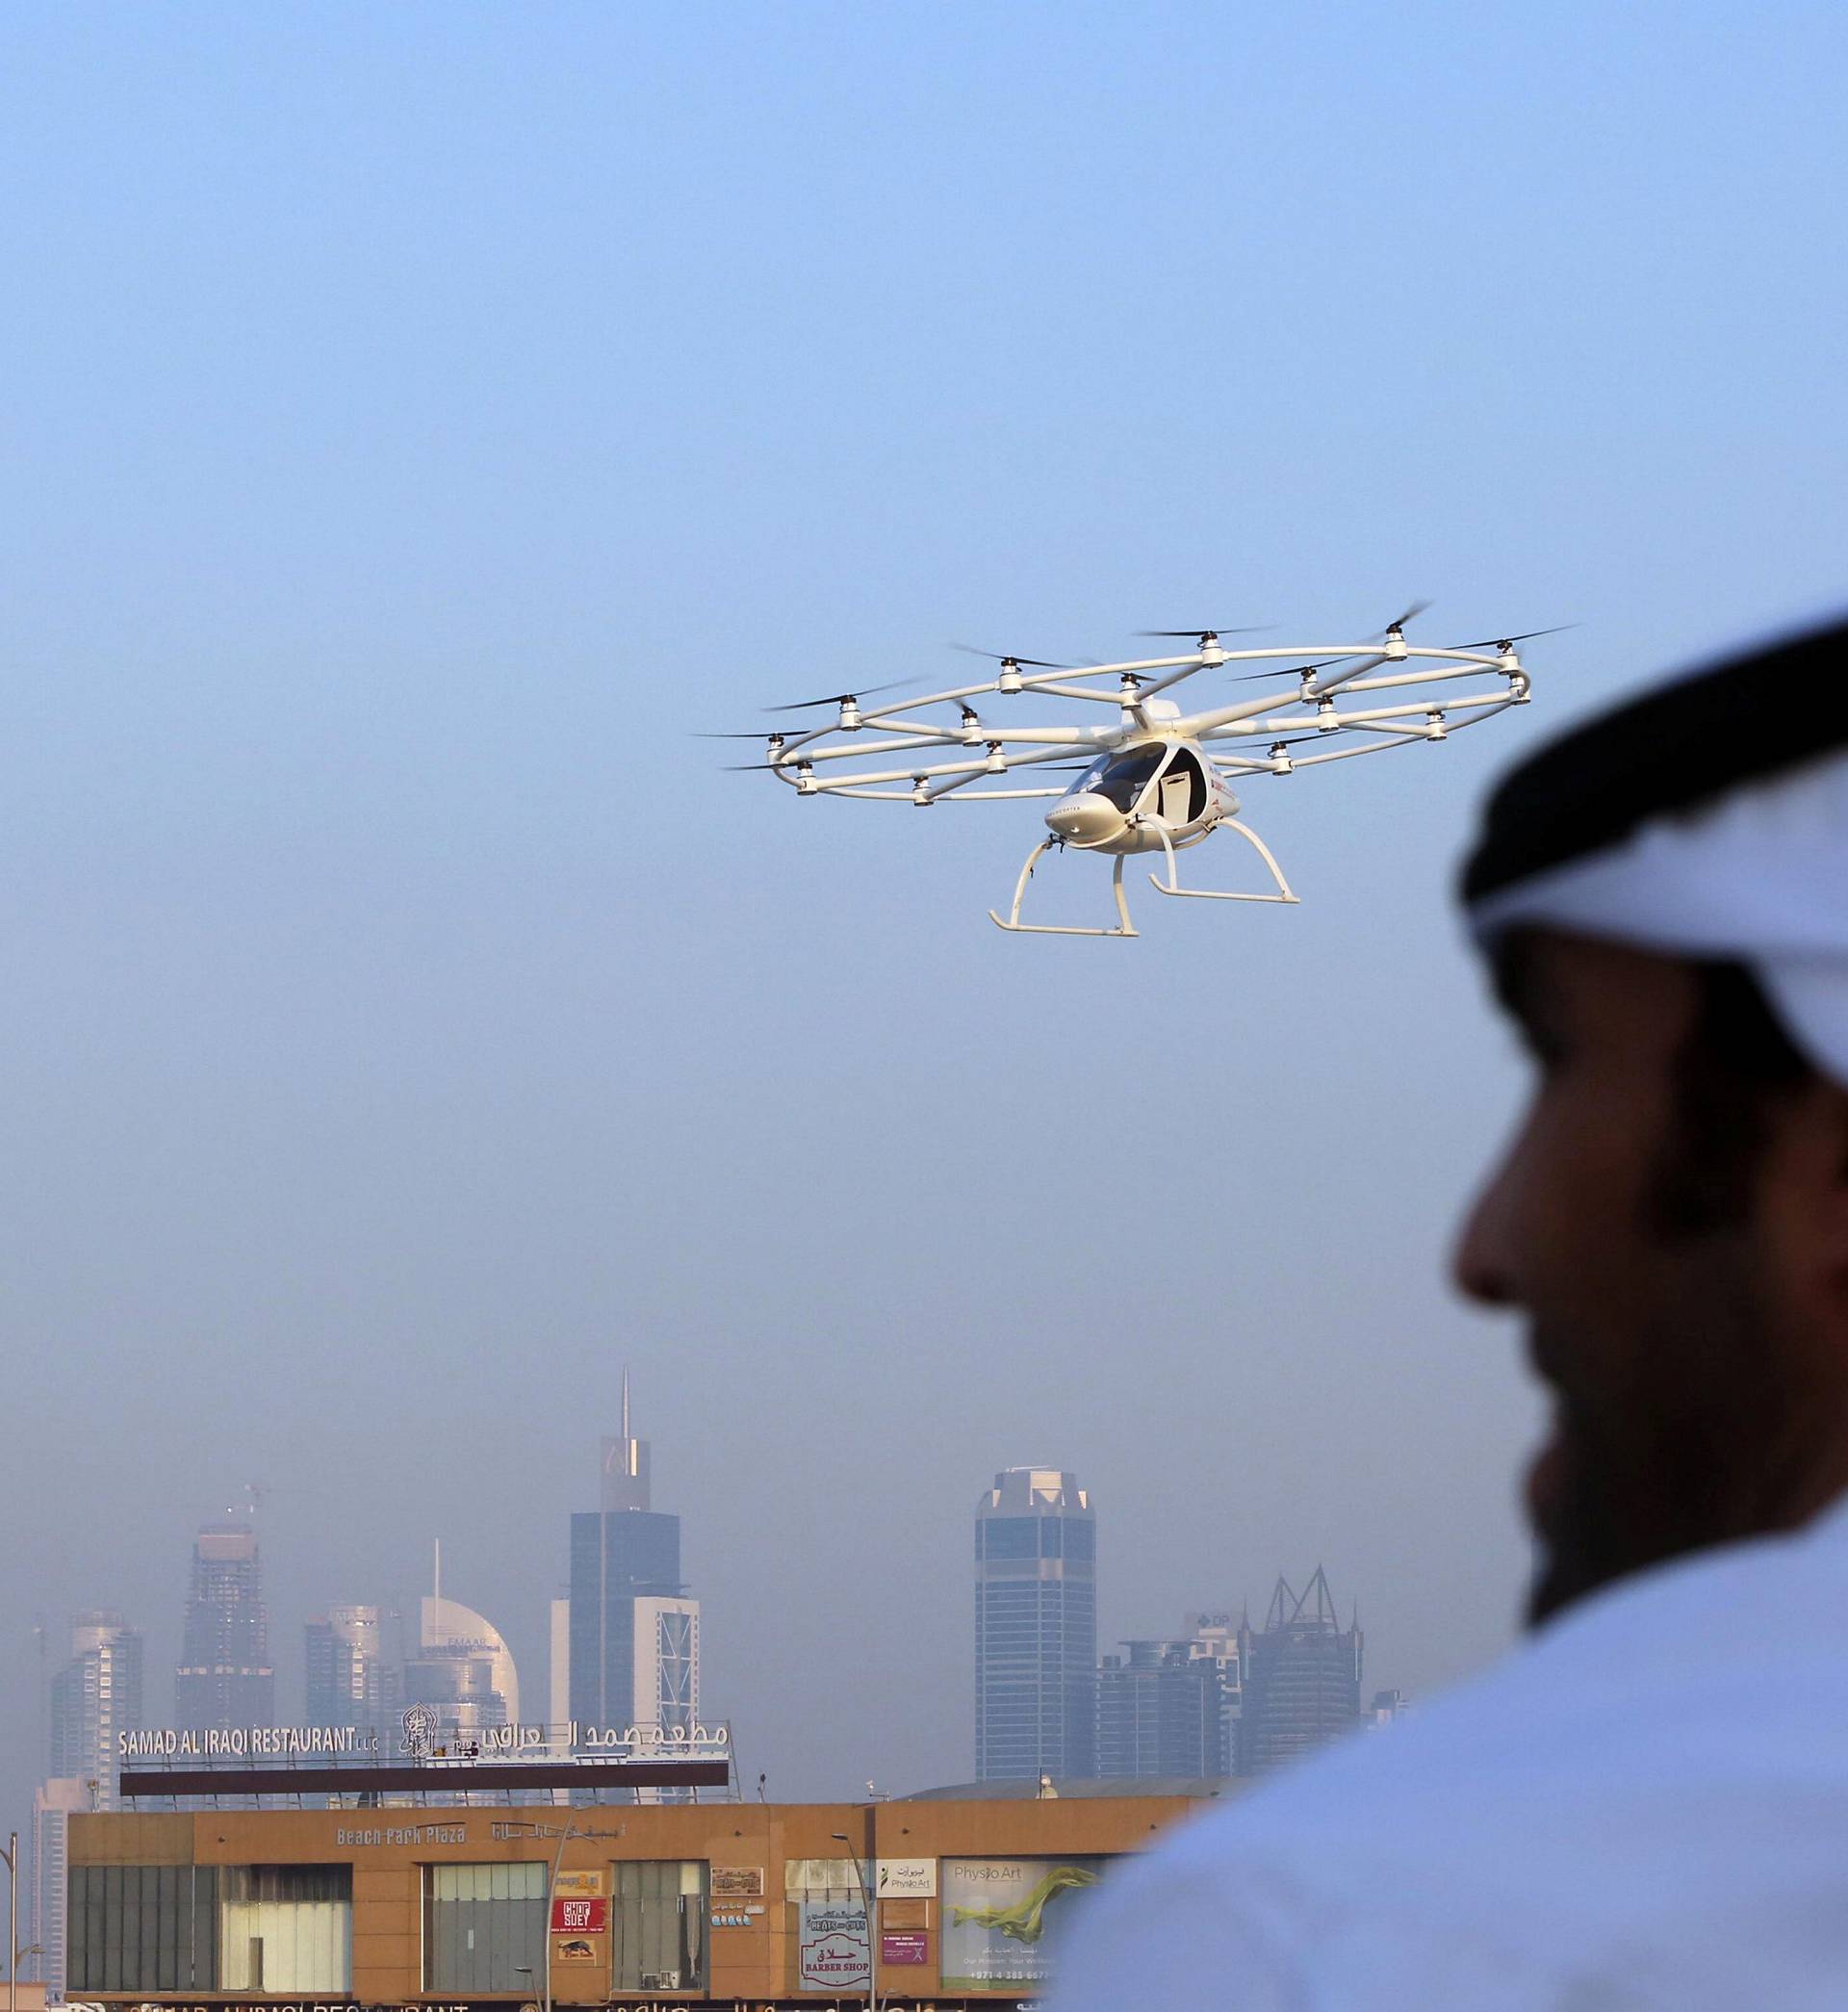 A man looks on as the flying taxi is seen in Dubai